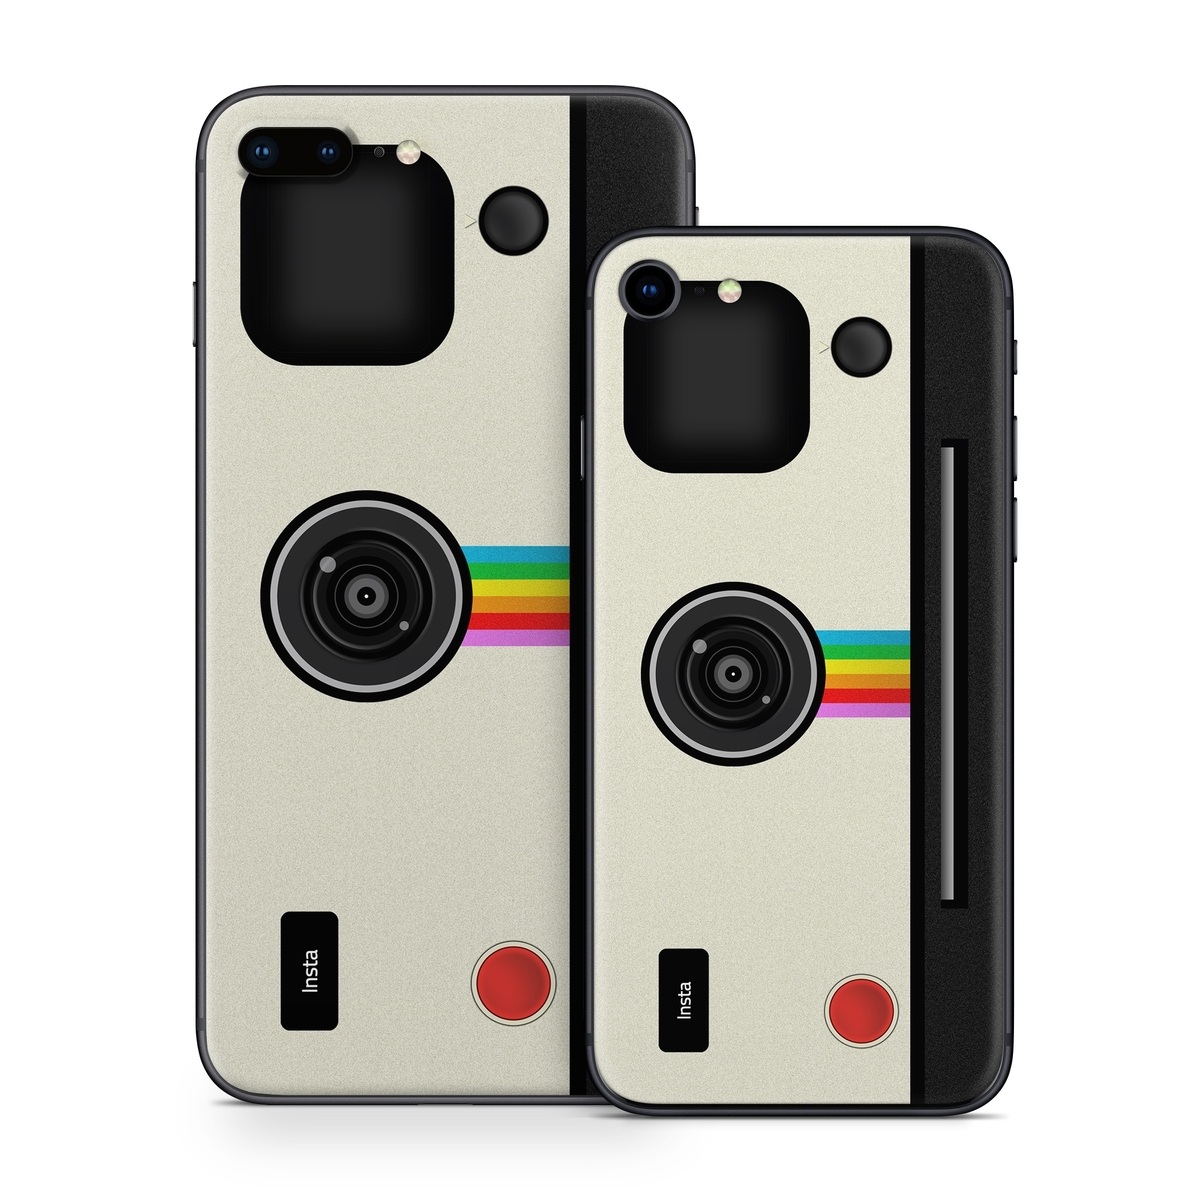  Skin design of Cameras & optics, Camera, Technology, Circle, Electronic device, Electronics, Colorfulness, with gray, black, red colors